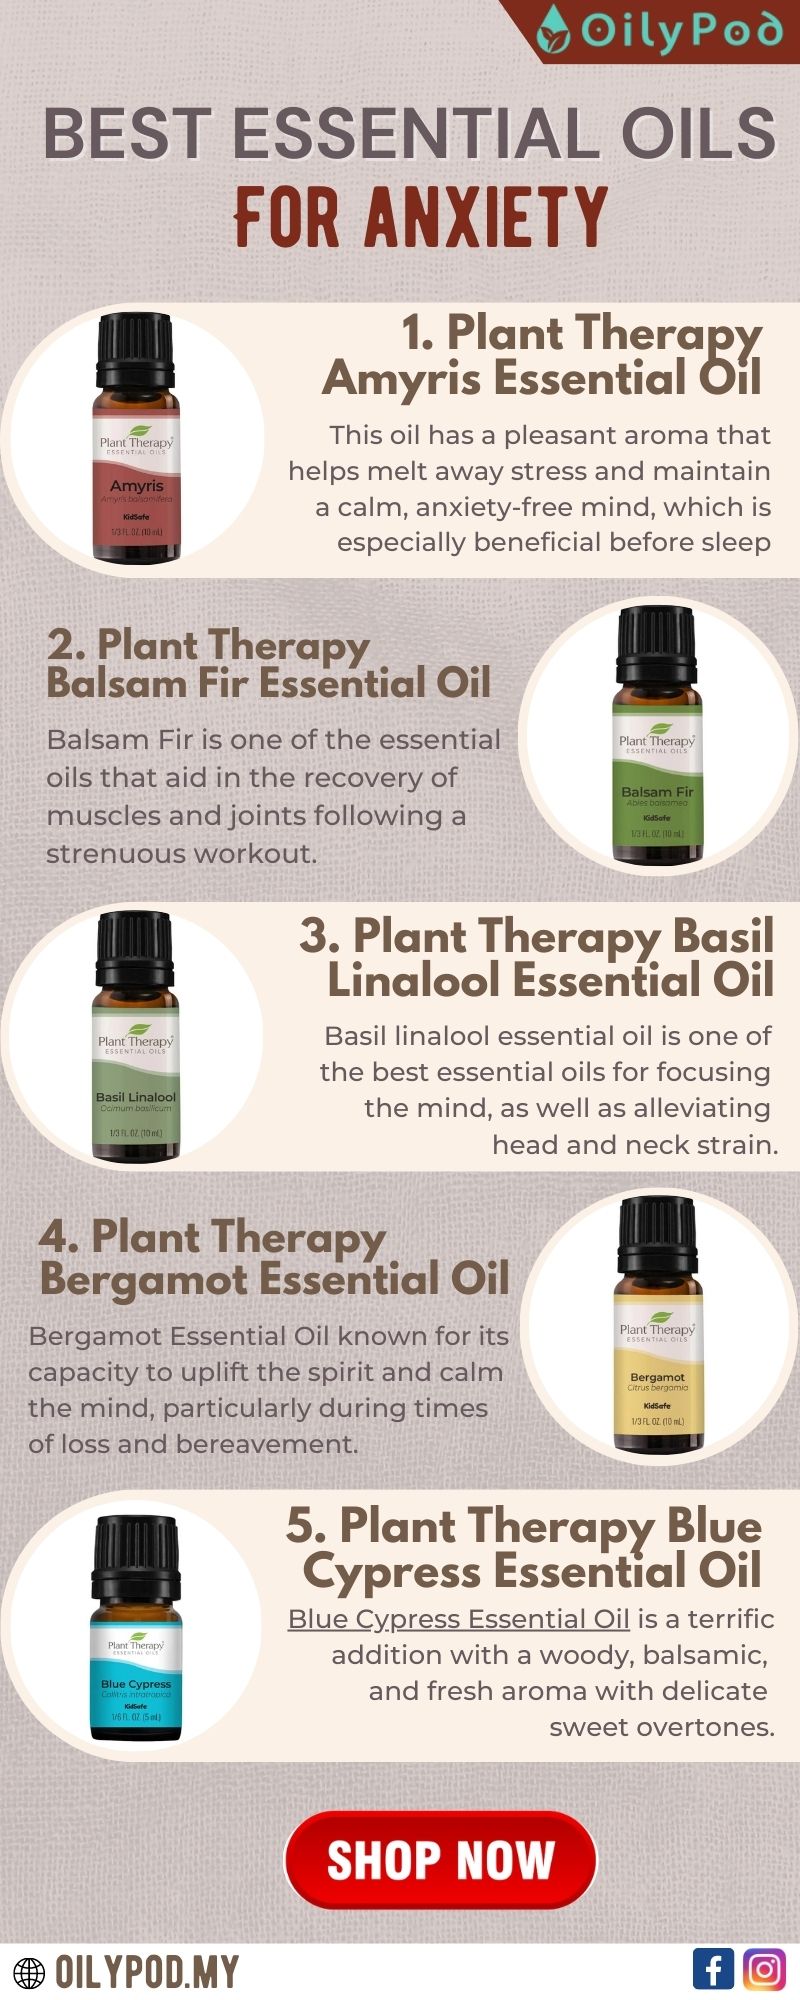 BEST ESSENTIAL OILS FOR ANXIETY